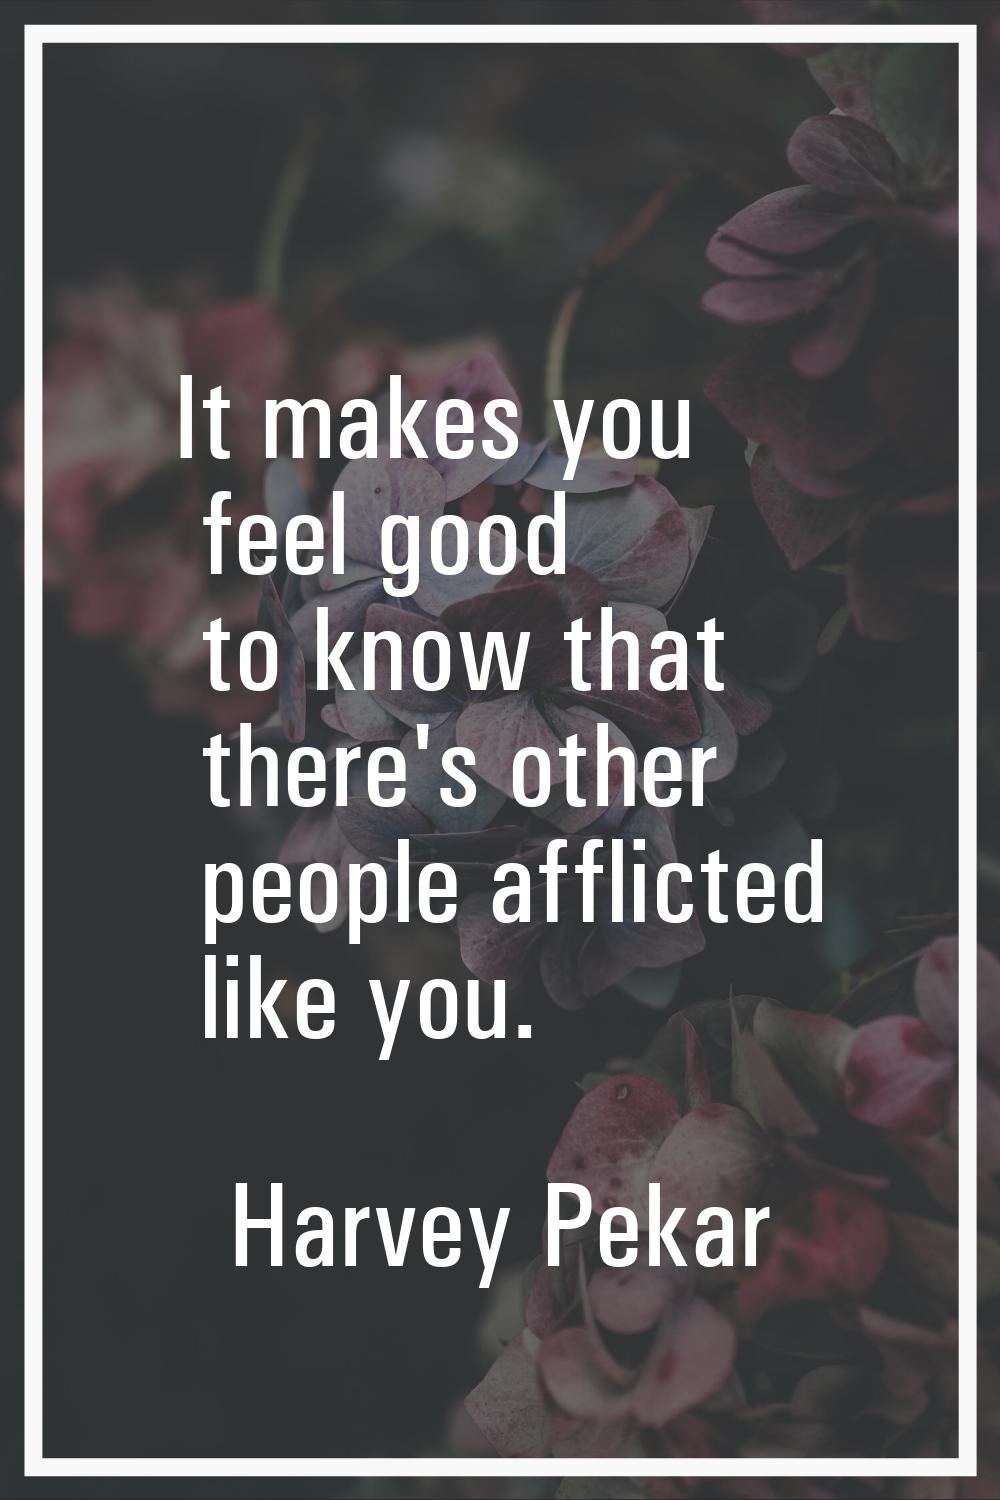 It makes you feel good to know that there's other people afflicted like you.